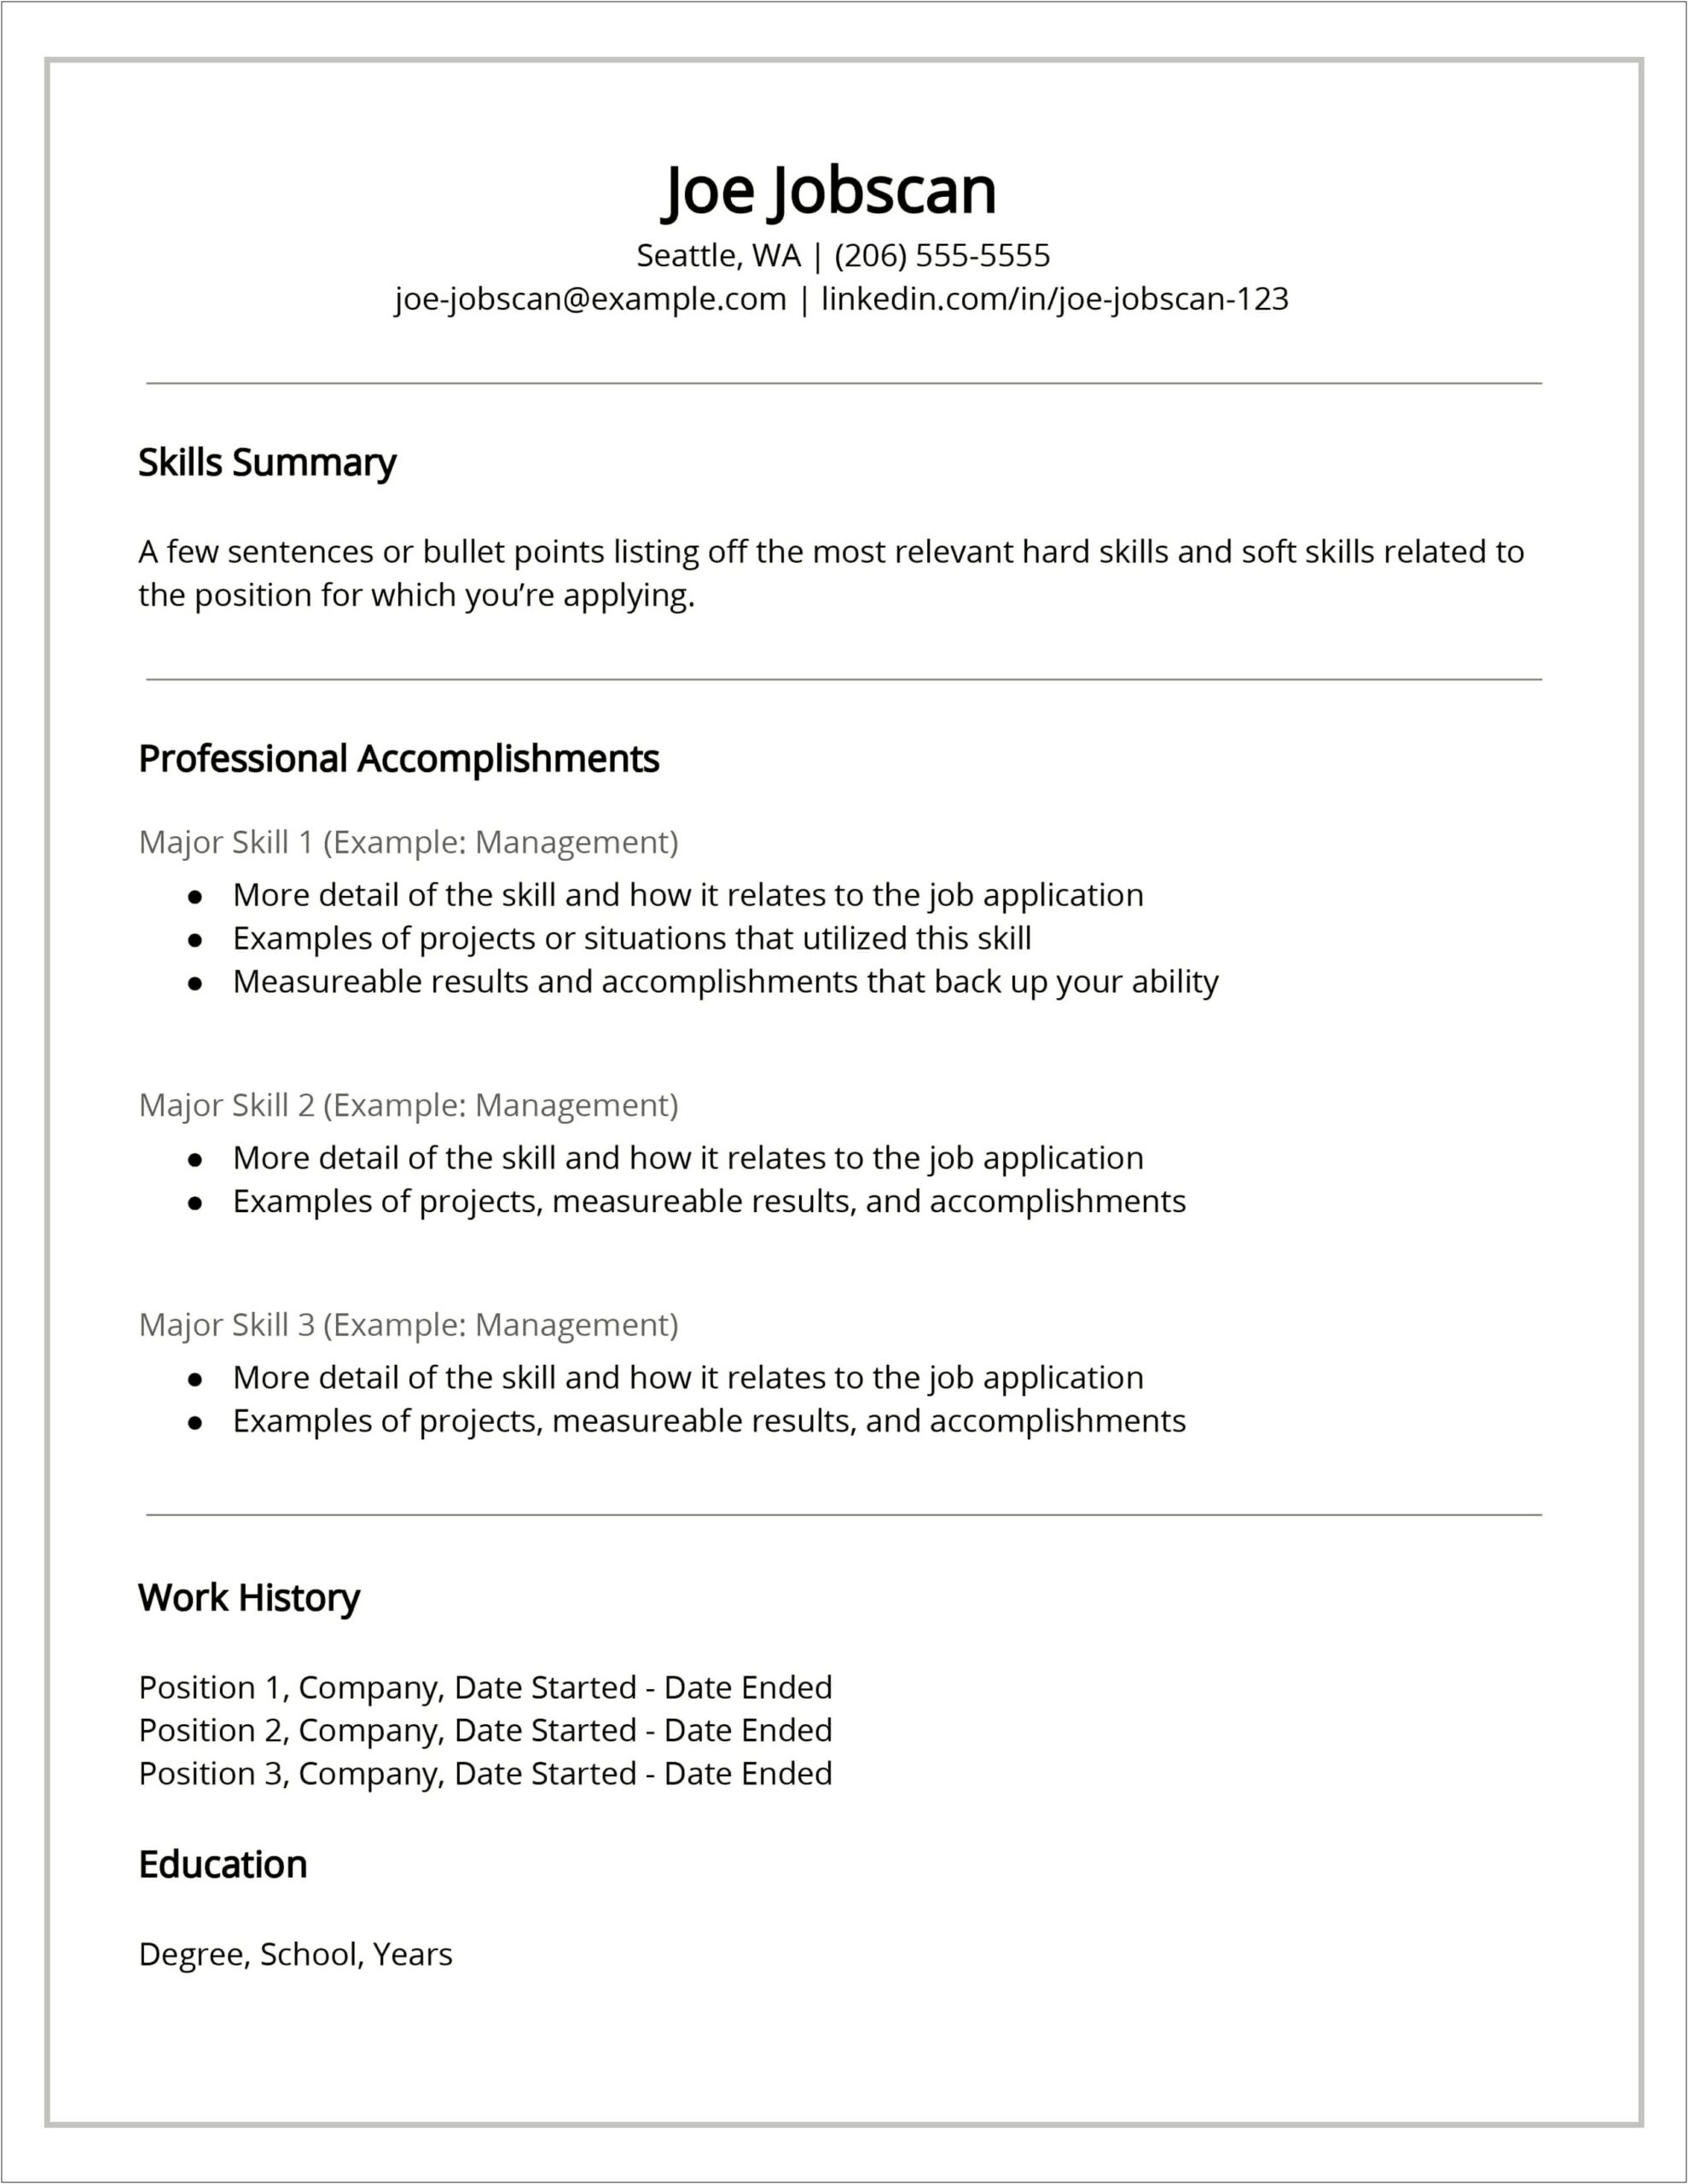 Resume Multiple Jobs At Same Company